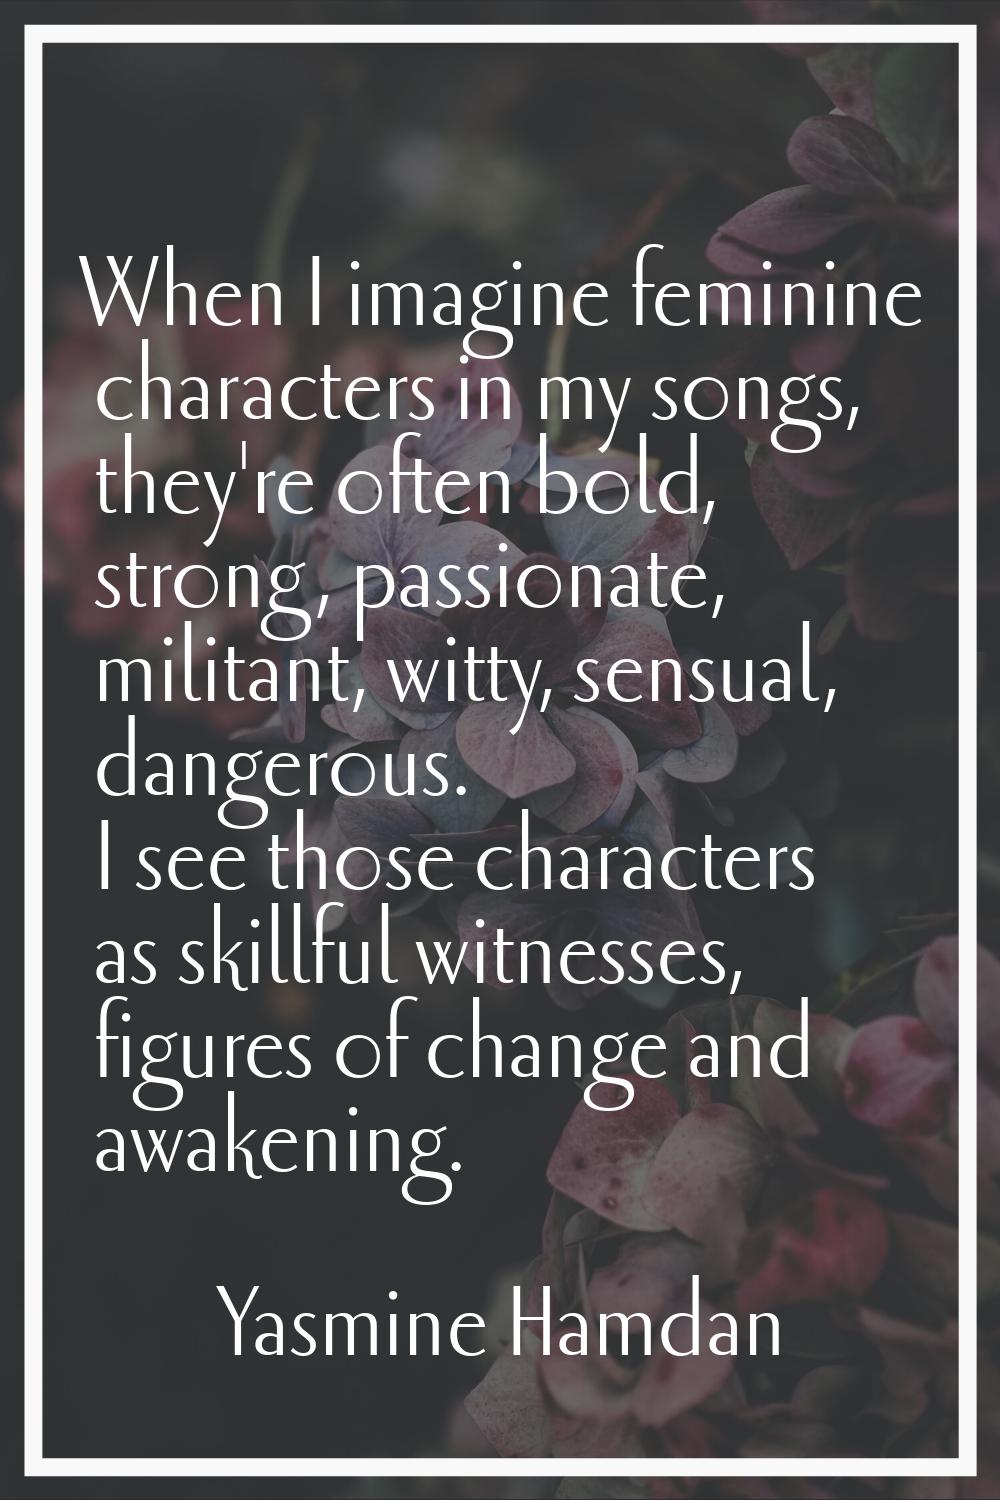 When I imagine feminine characters in my songs, they're often bold, strong, passionate, militant, w